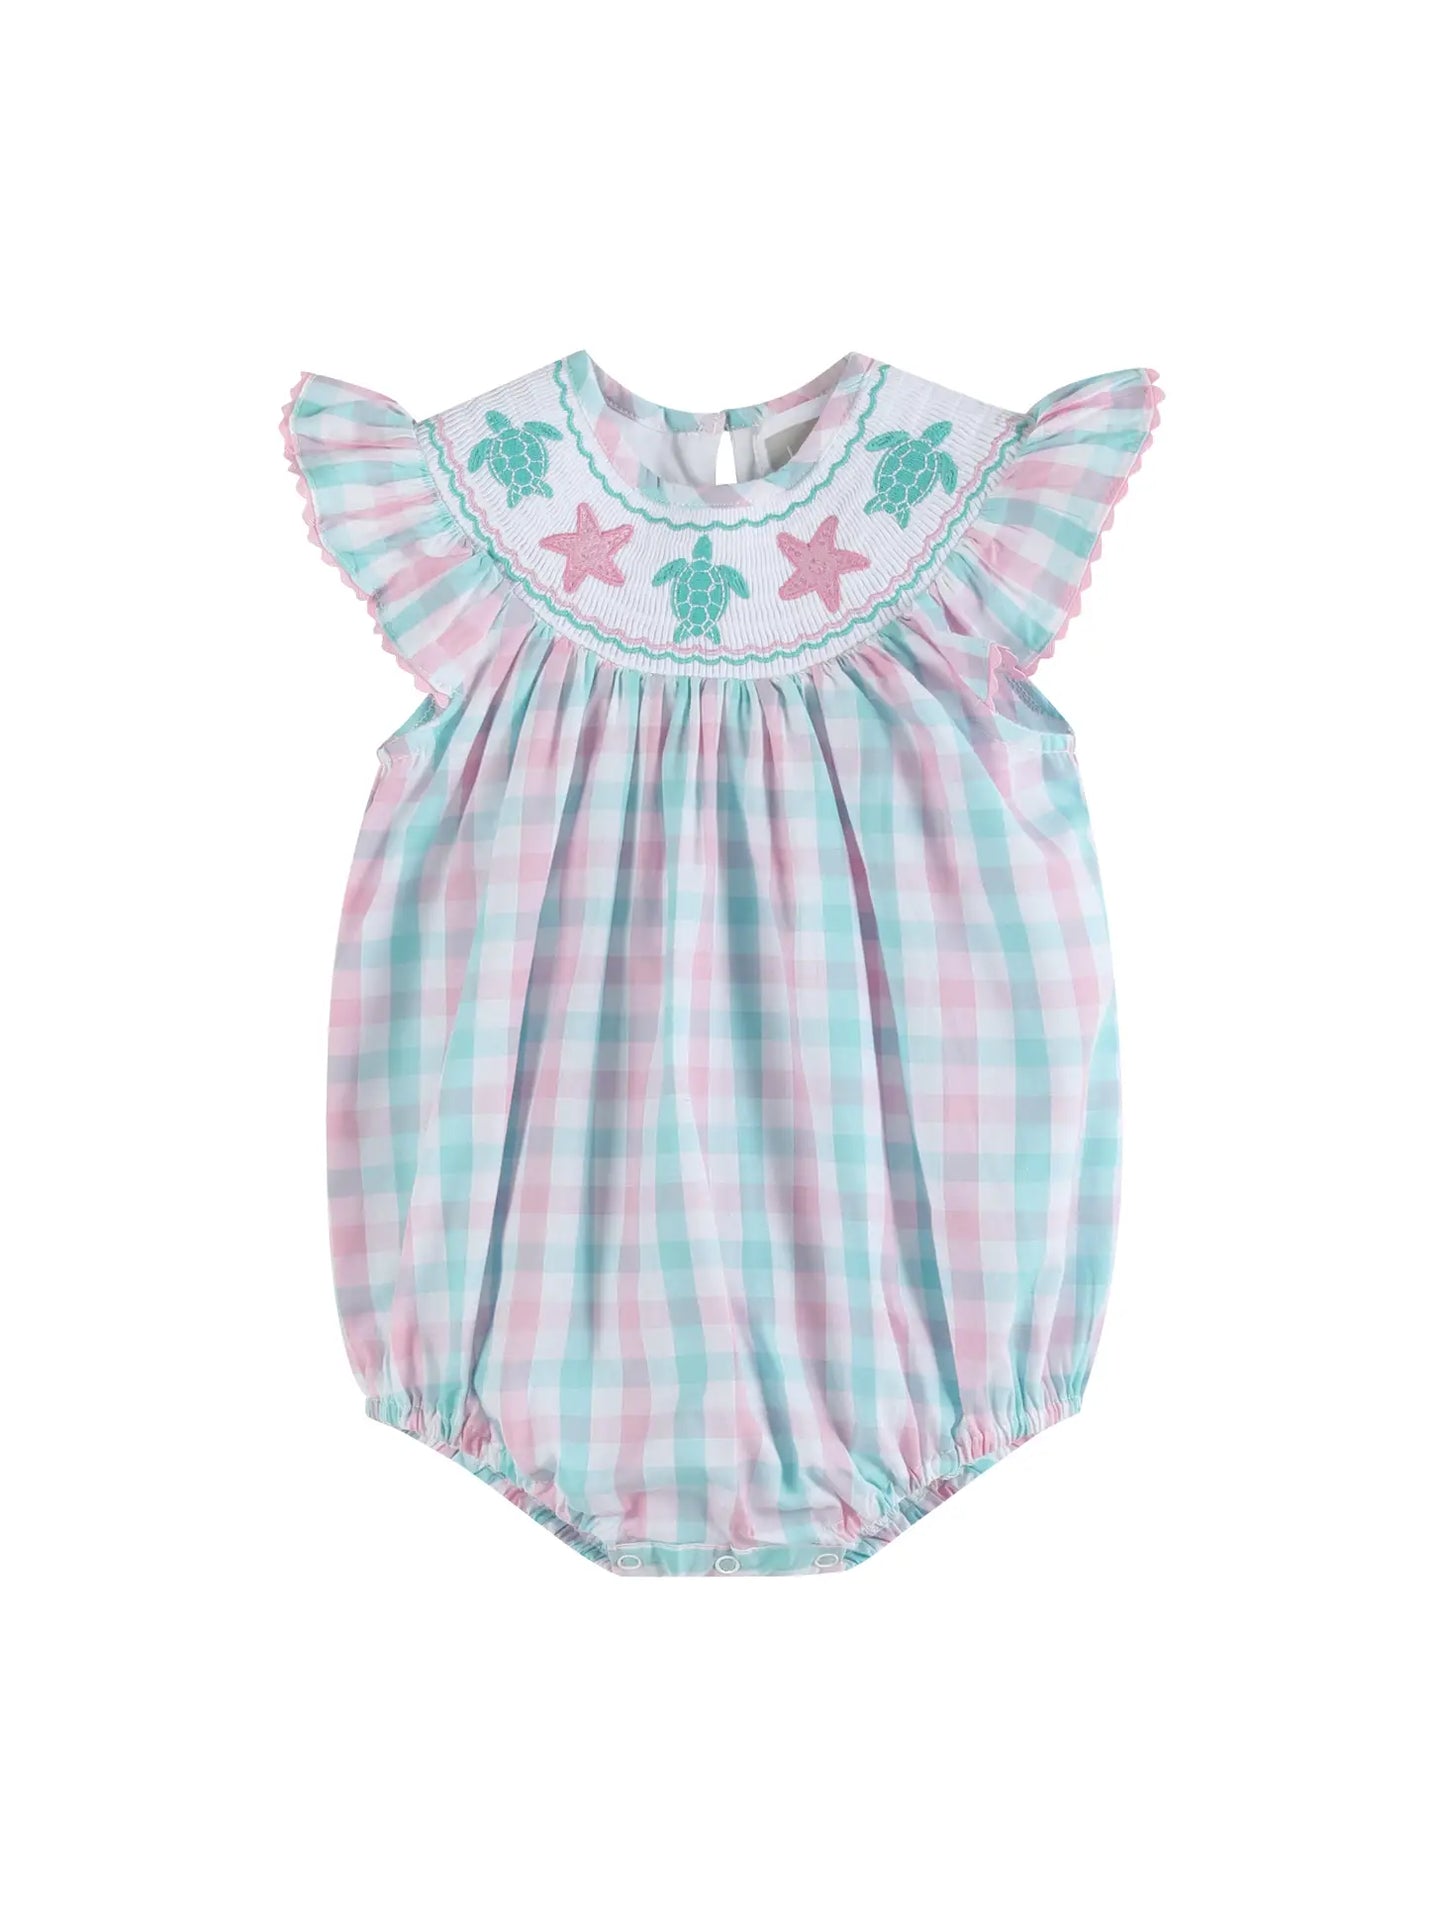 Pink and Turquoise Gingham Turtle Smocked Ruffle Romper